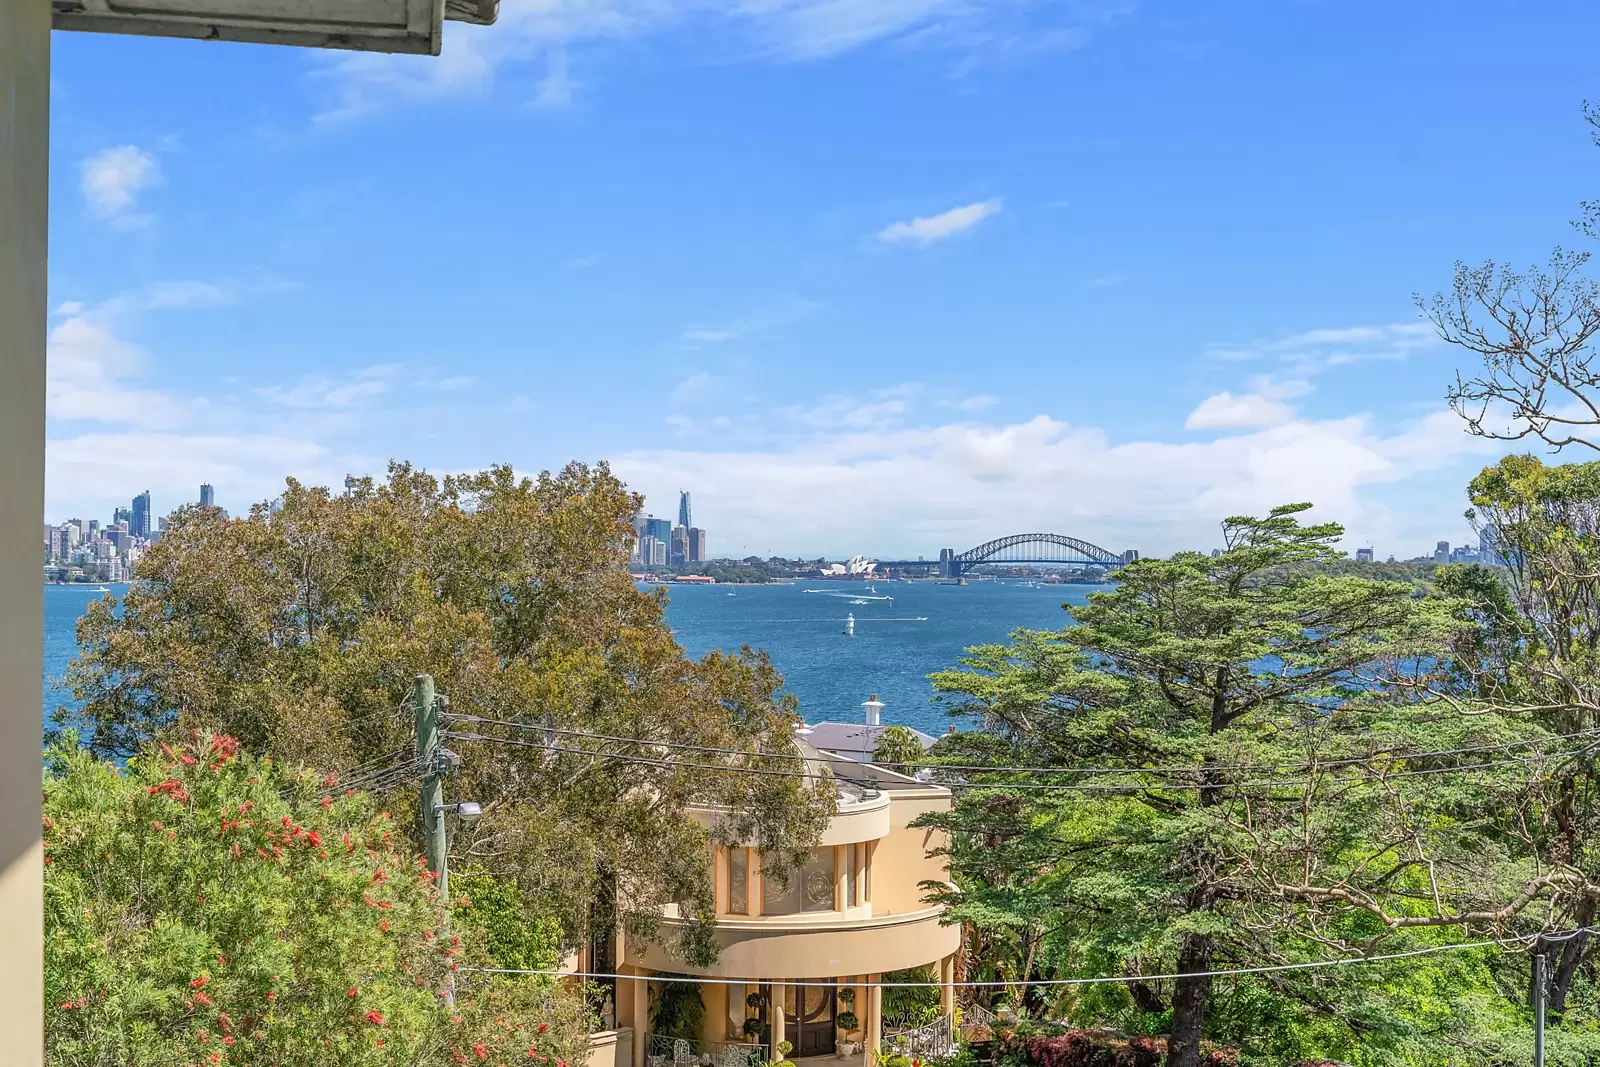 Photo #10: 41 Vaucluse Road, Vaucluse - Sold by Sydney Sotheby's International Realty